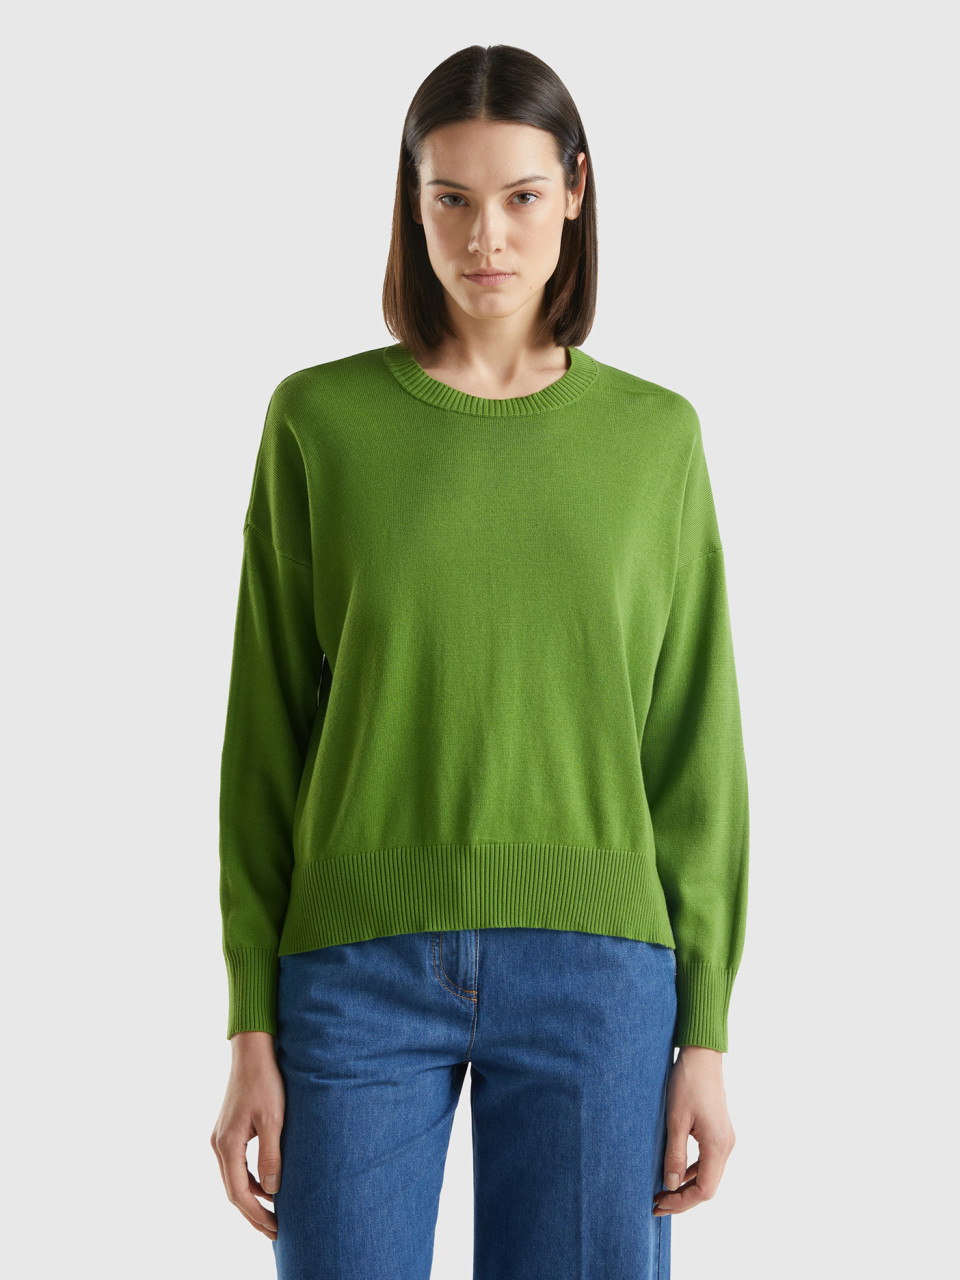 Benetton, Crew Neck Sweater In Tricot Cotton, Military Green, Women